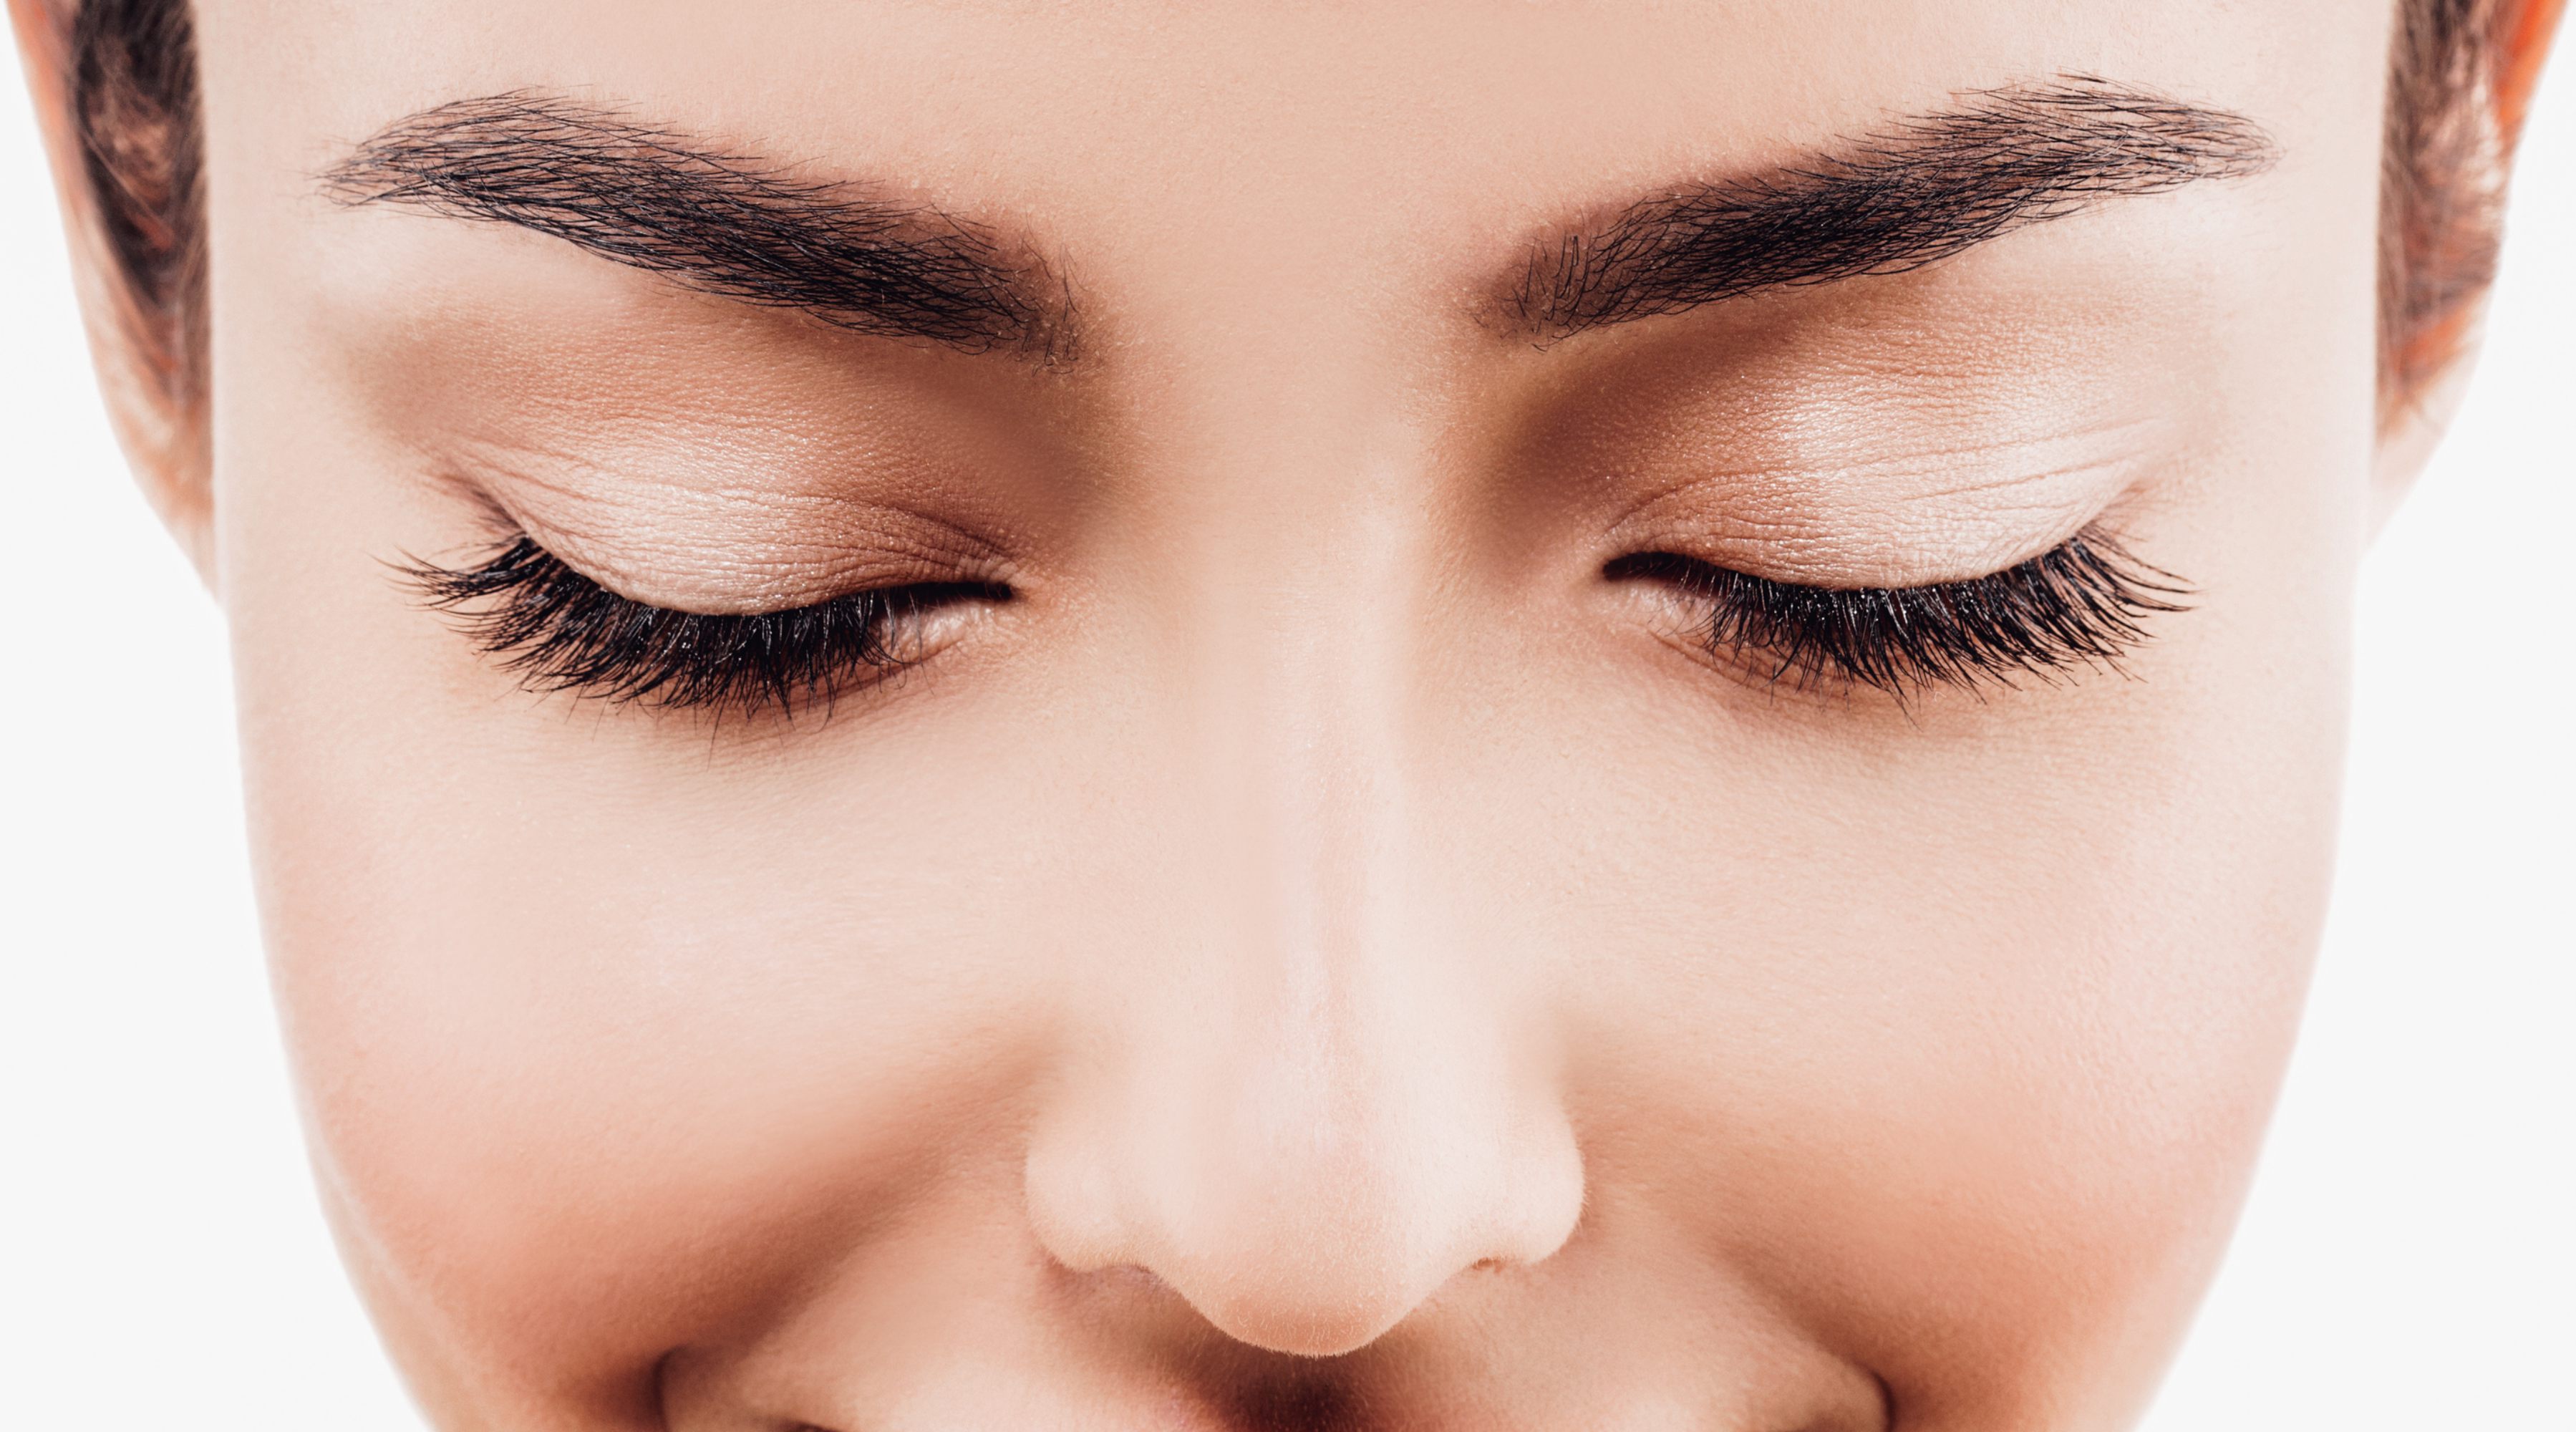 From trendy to timeless looks, here’s how to achieve flawless brows